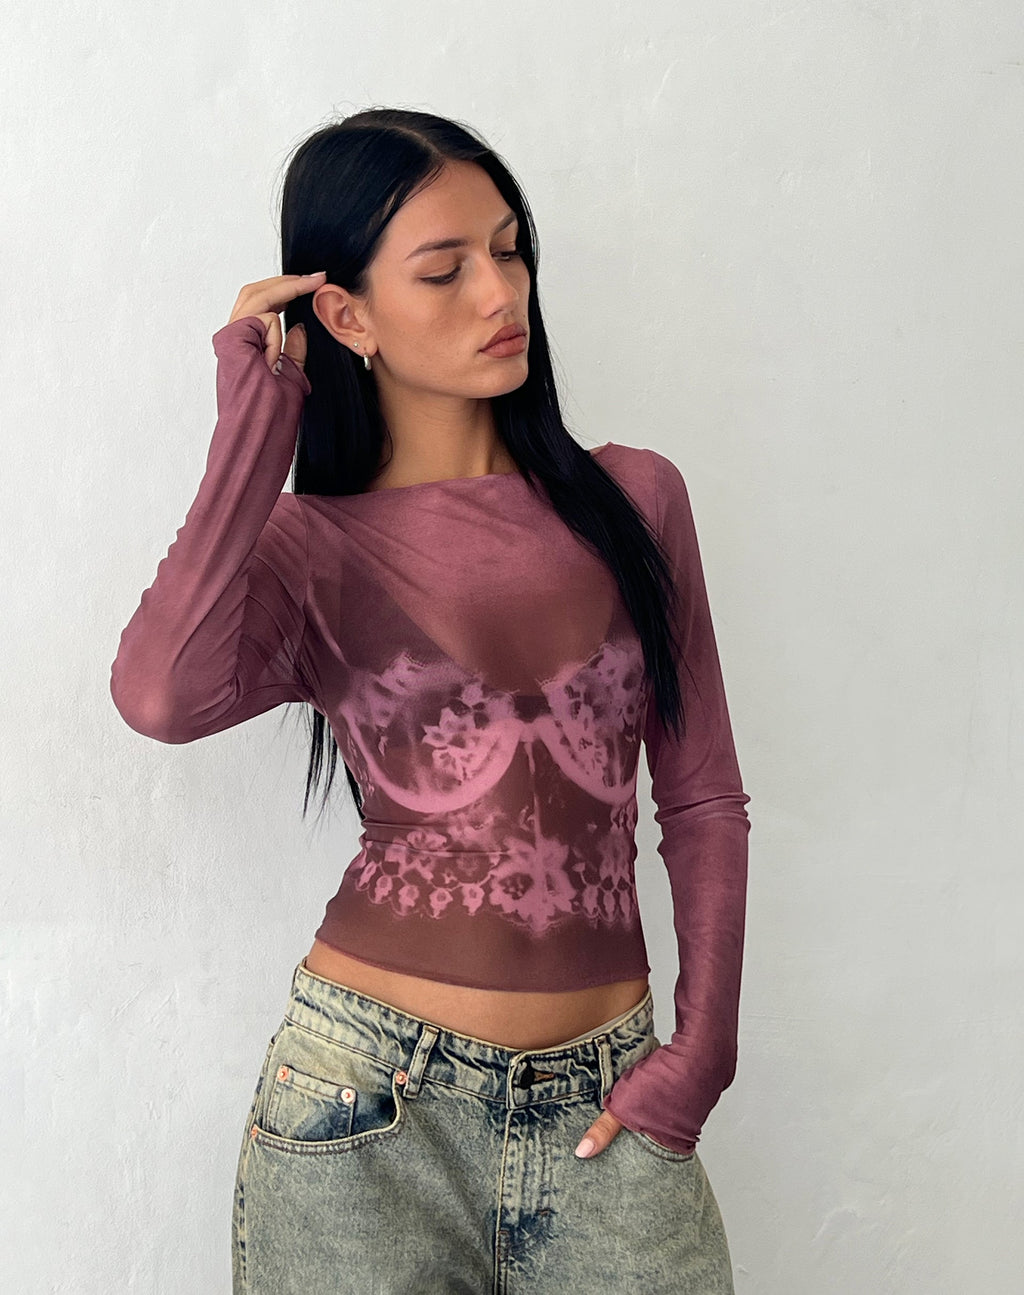 Armali Long Sleeve Top in Burgundy with Lace Bra Scan